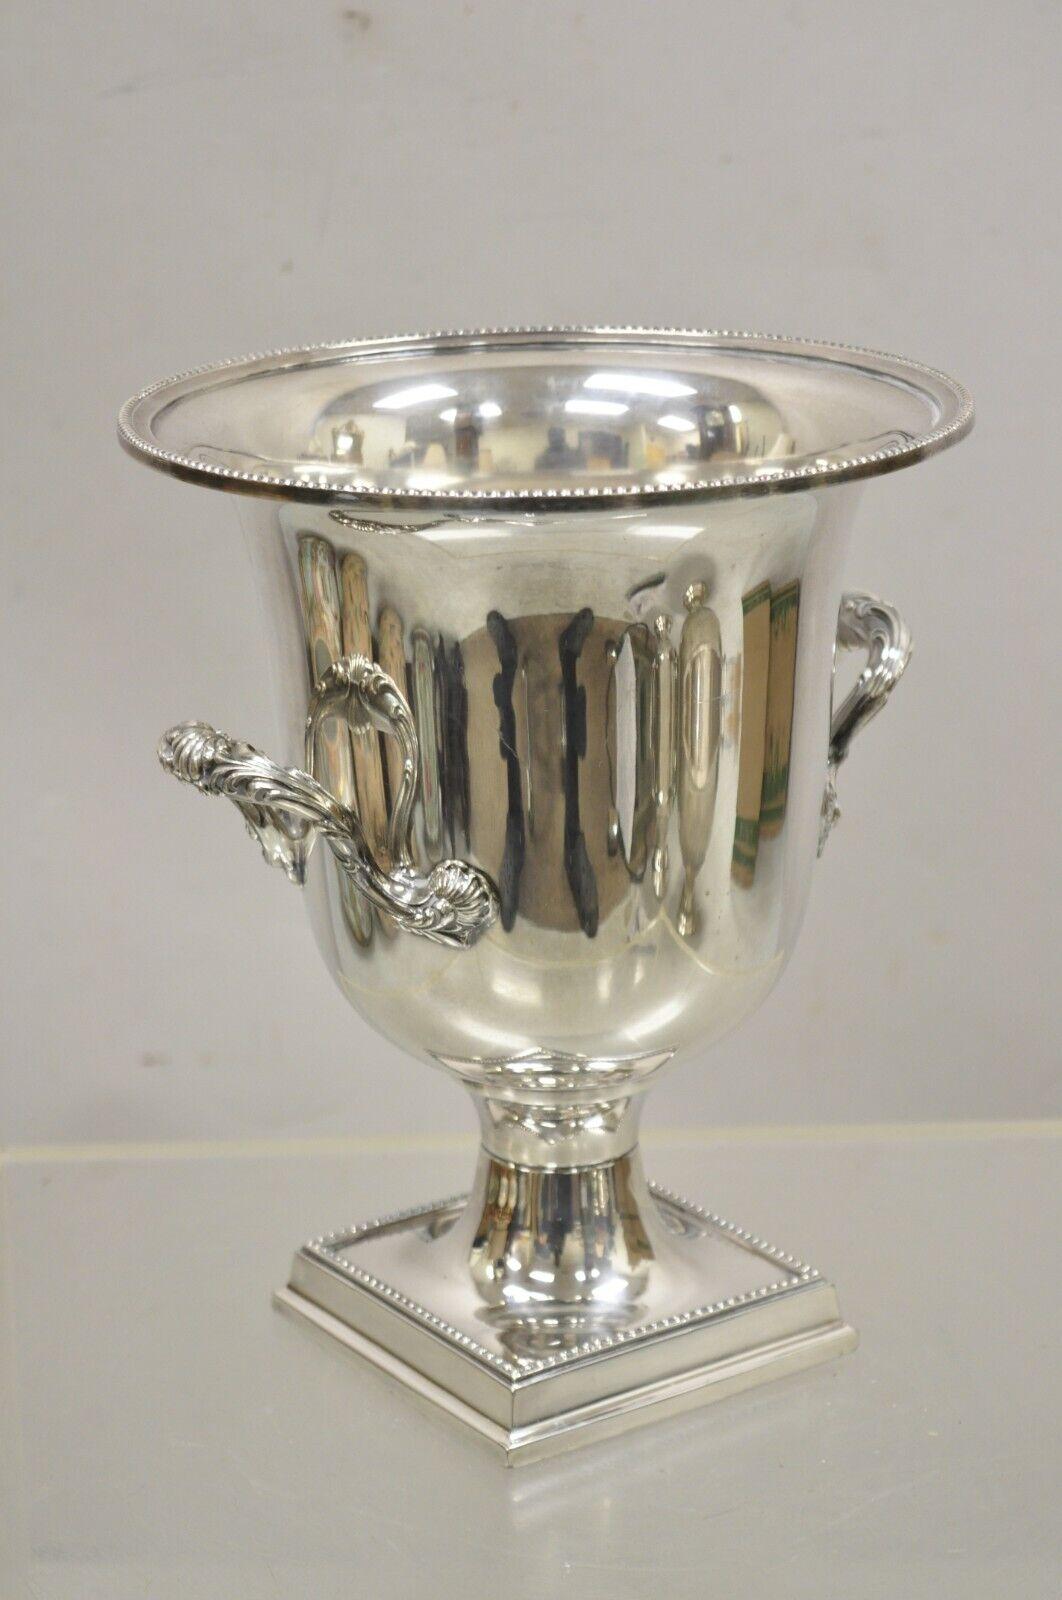 Vintage Gorham Silver Plated Trophy Cup Champagne Wine Chiller Ice Bucket. Item featured is a nice heavy weight, stepped square base, ornate twin handles, original stamp, very nice vintage item, quality craftsmanship, great style and form. Circa